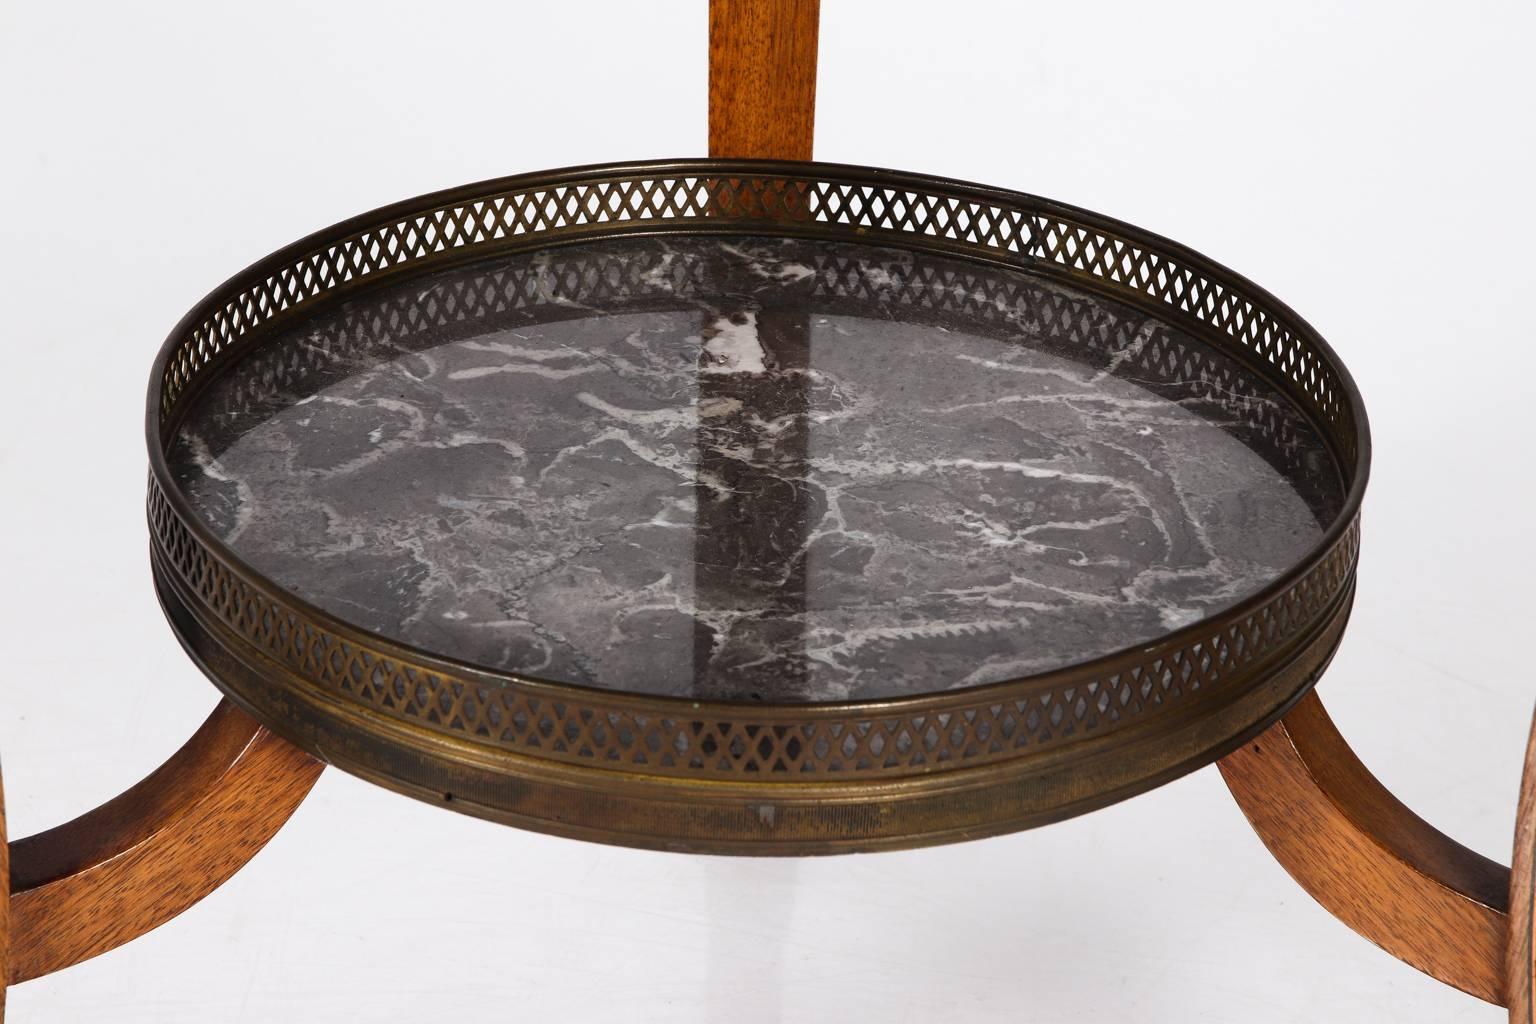 Regency style card table with a marble top, circa 19th century.
 